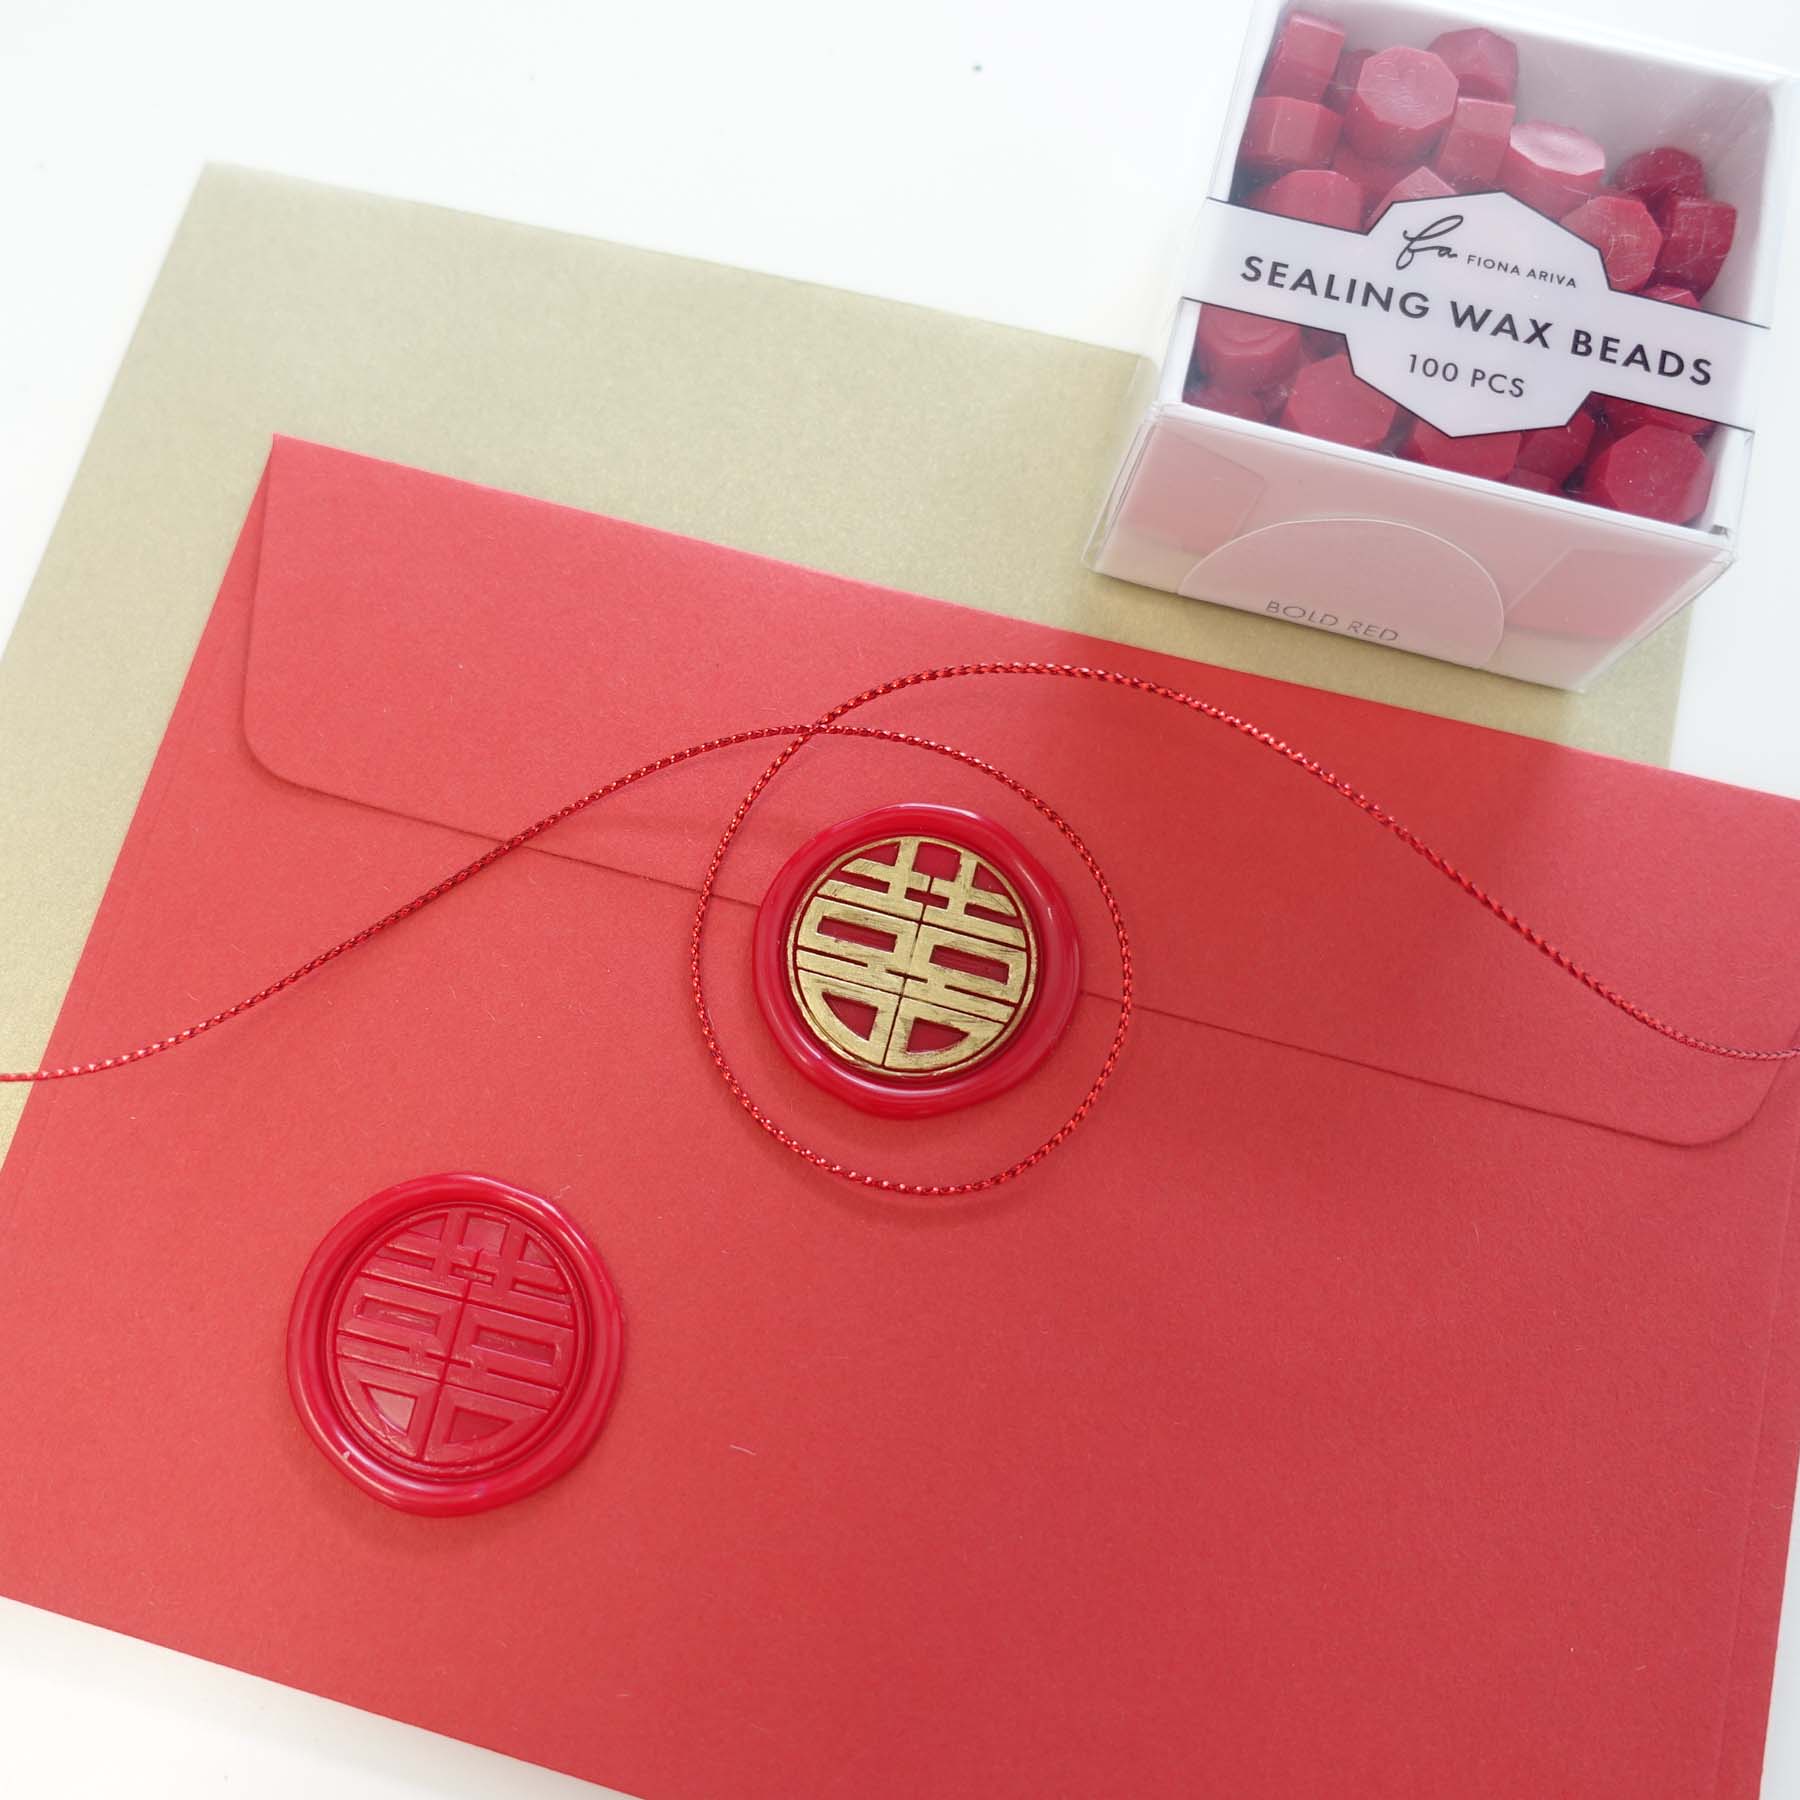 bright festive bold red sealing wax beads australia fiona ariva with double happiness wax seal stamp